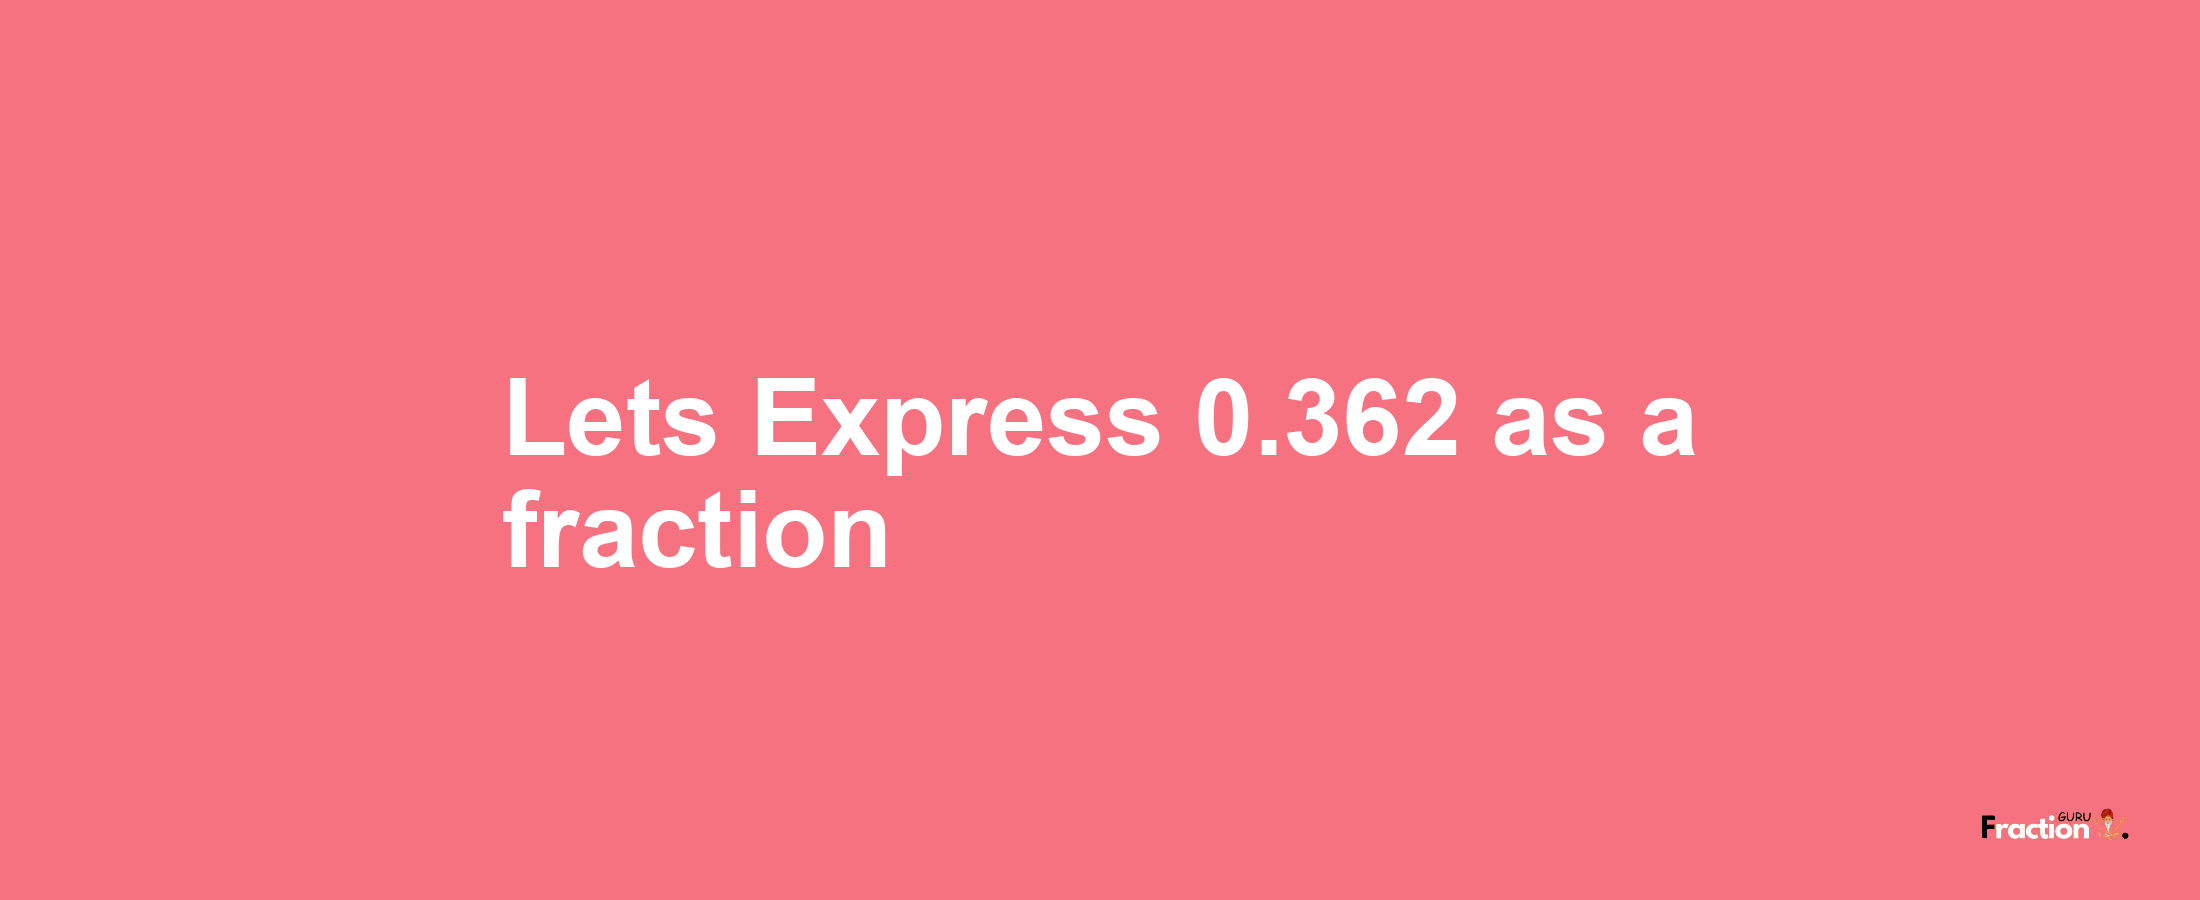 Lets Express 0.362 as afraction